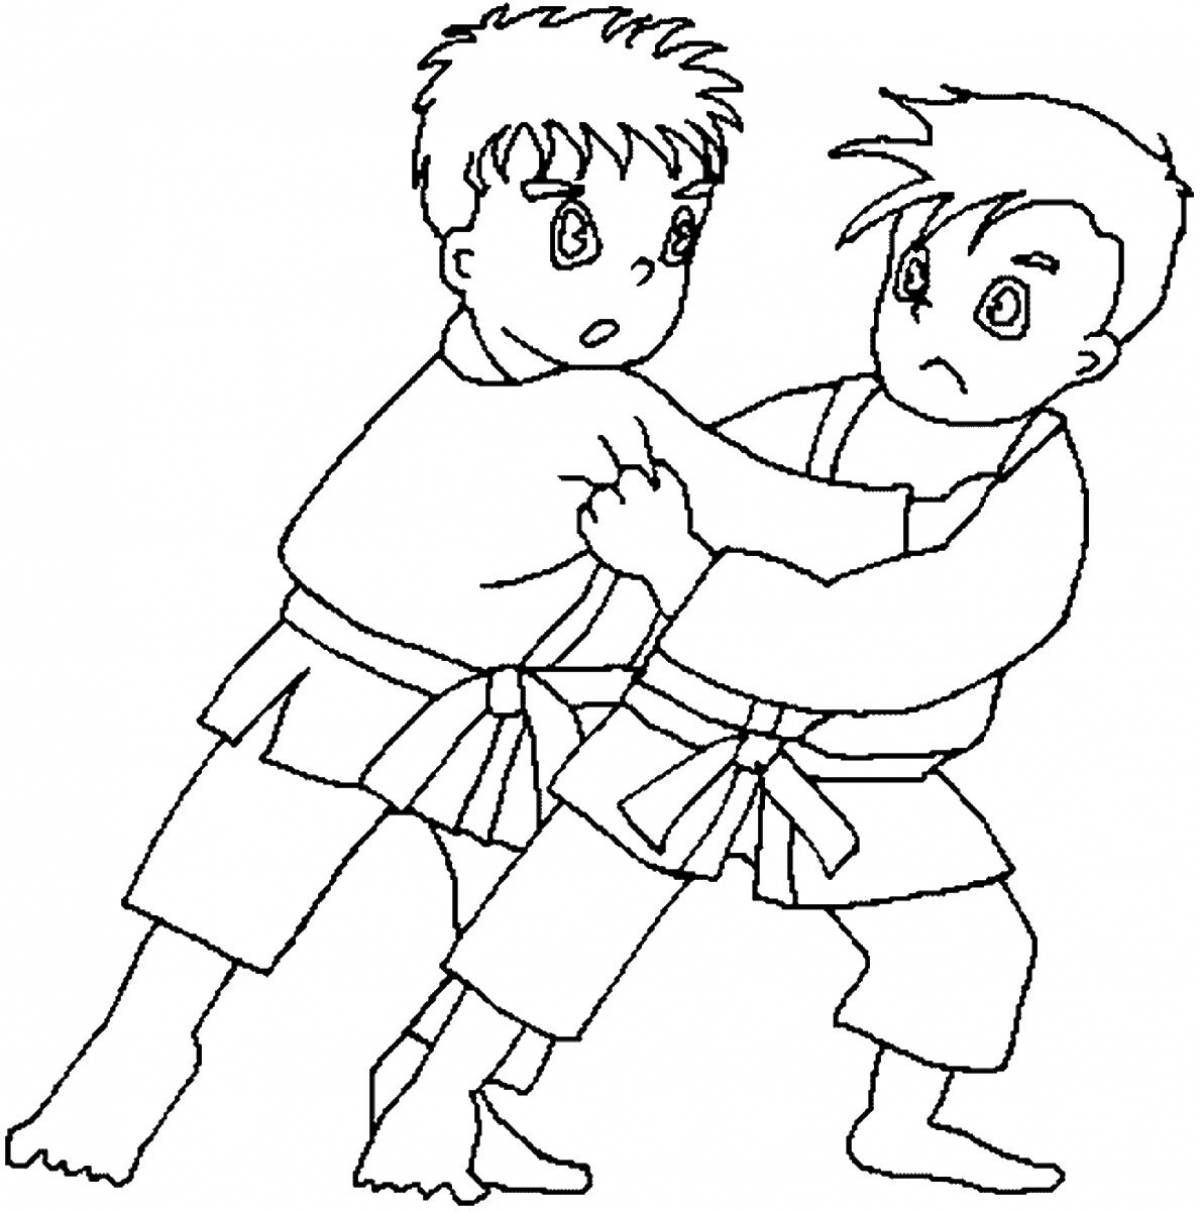 Inspirational judo coloring book for kids